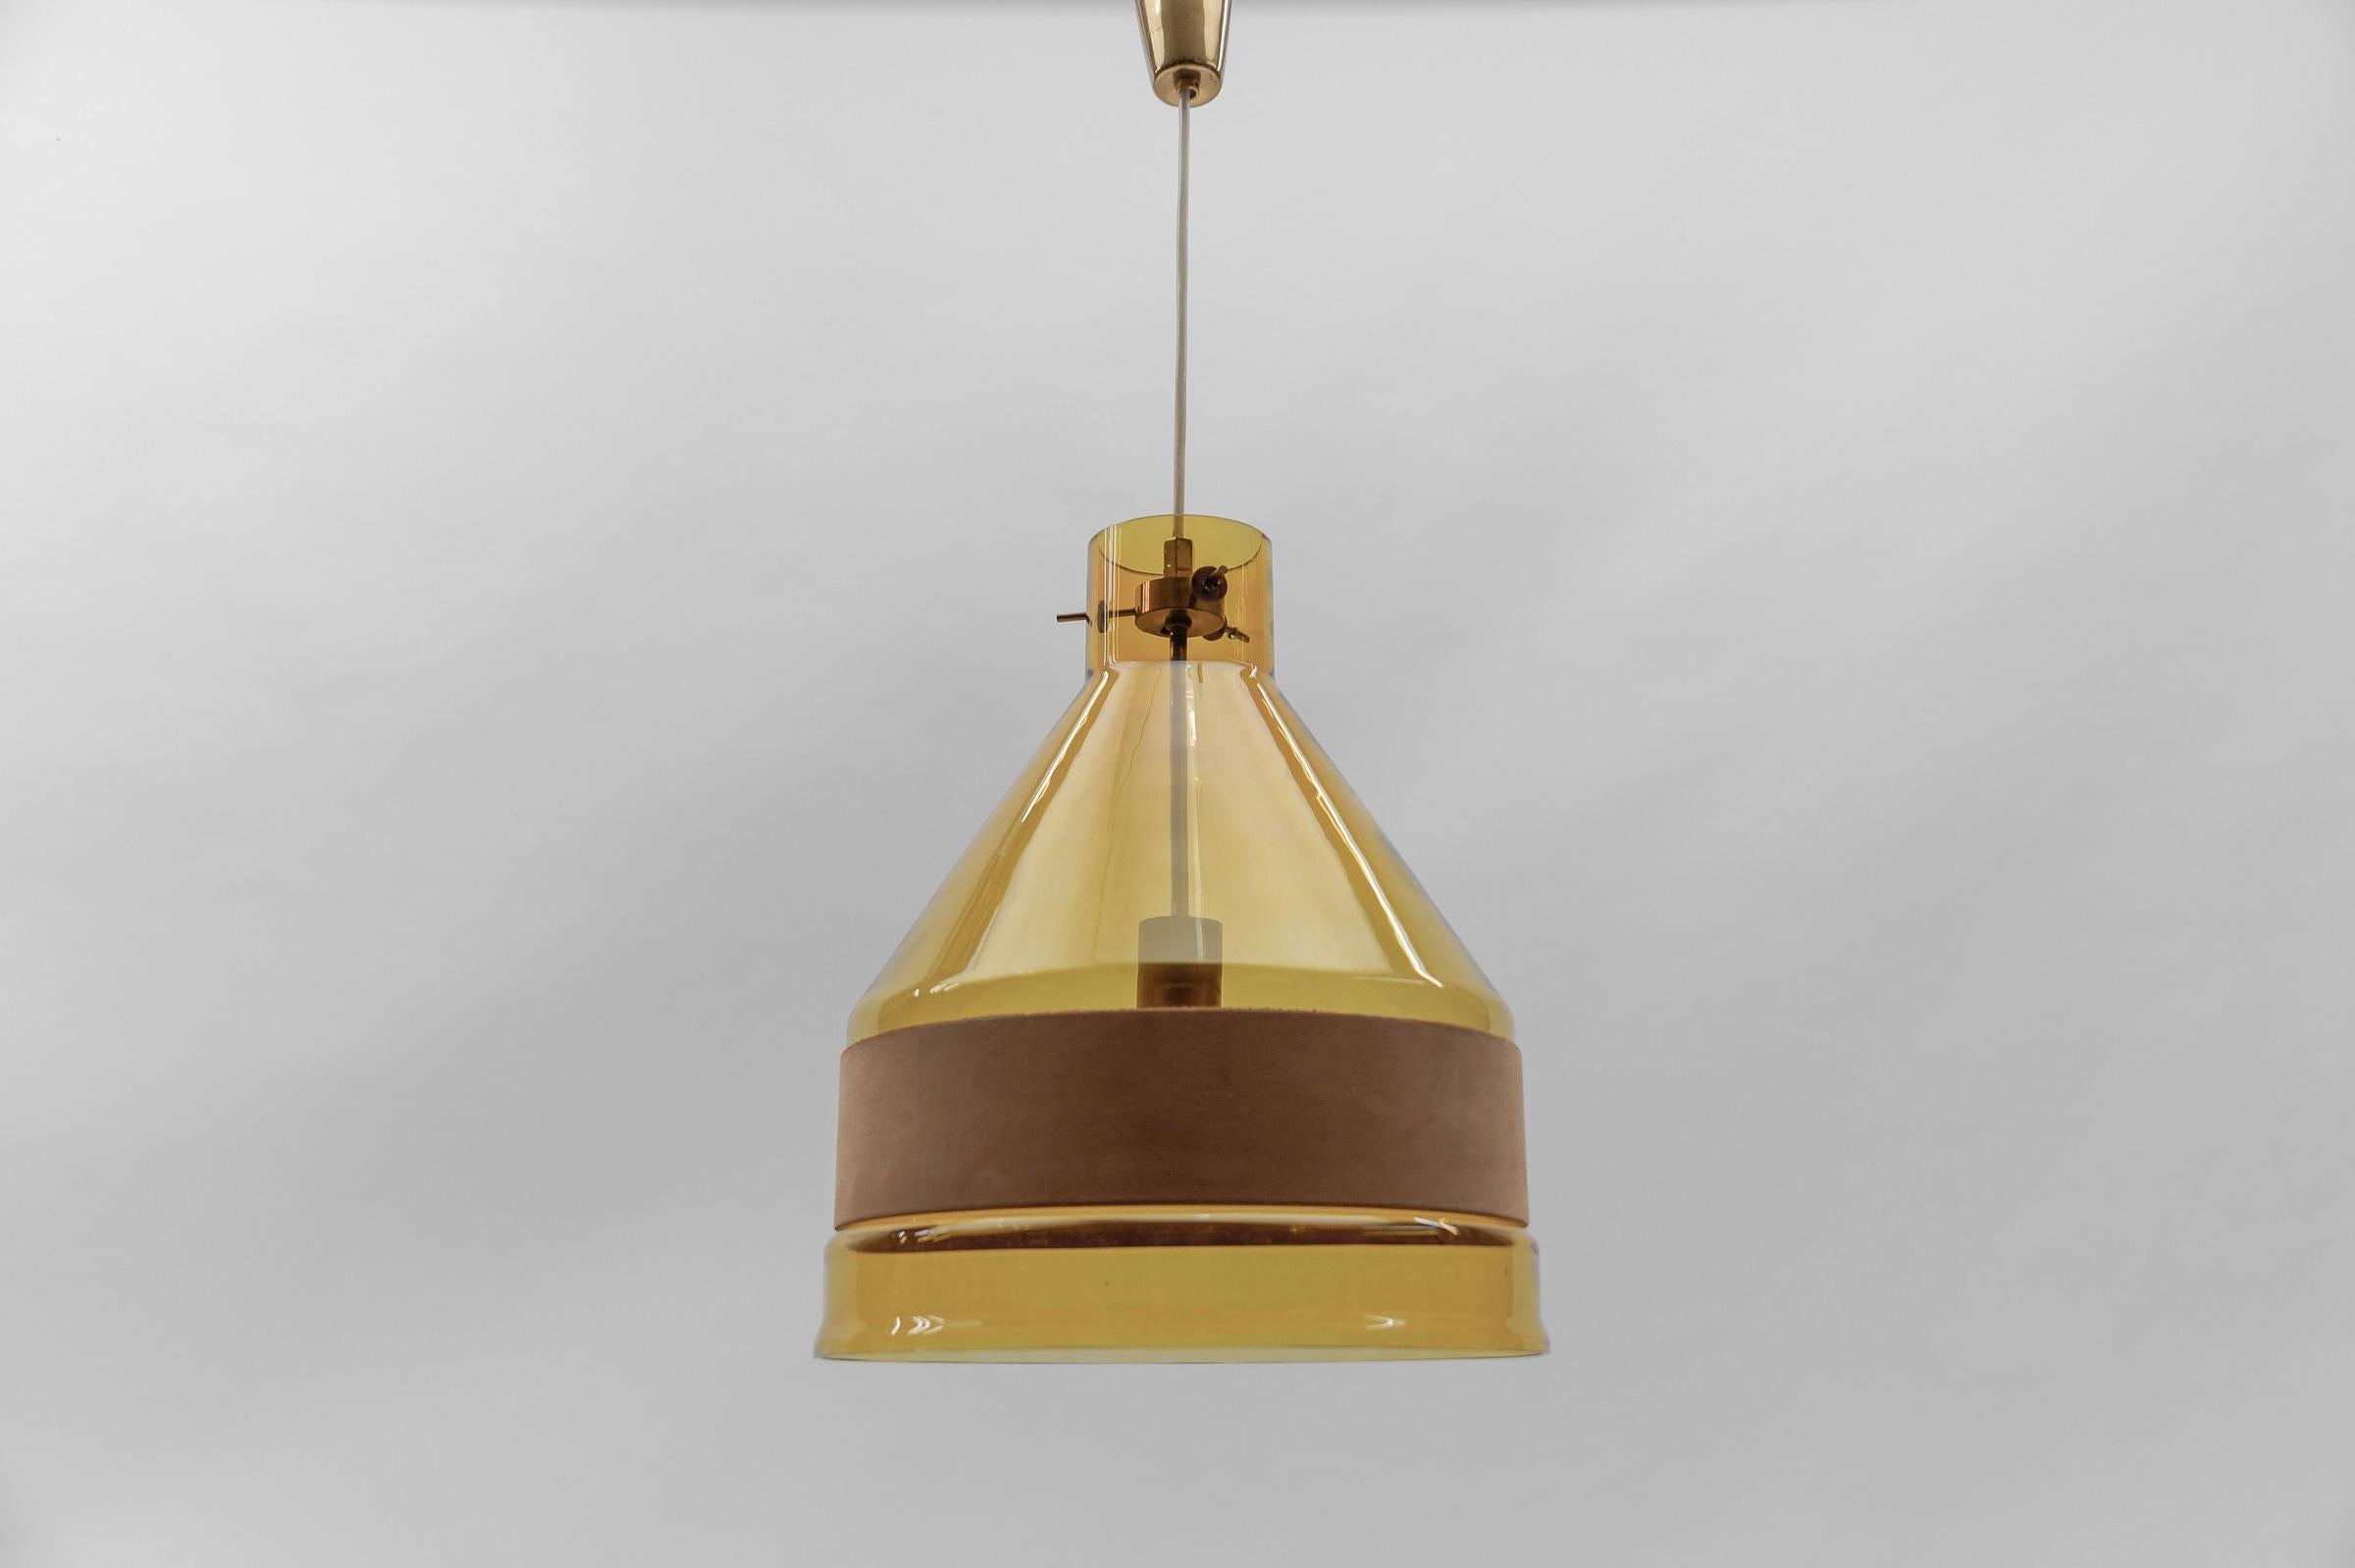 Rare J.T. Kalmar Yellow Tinted Glass Pendant Lamp with Leather, Austria 1970s

Dimensions
Height: 31.49 in. (80 cm)
Diameter: 14.56 in. (37 cm)

The lamp is executed with 1x E27 Edison screw fit bulb. It is wired and in working condition. It runs